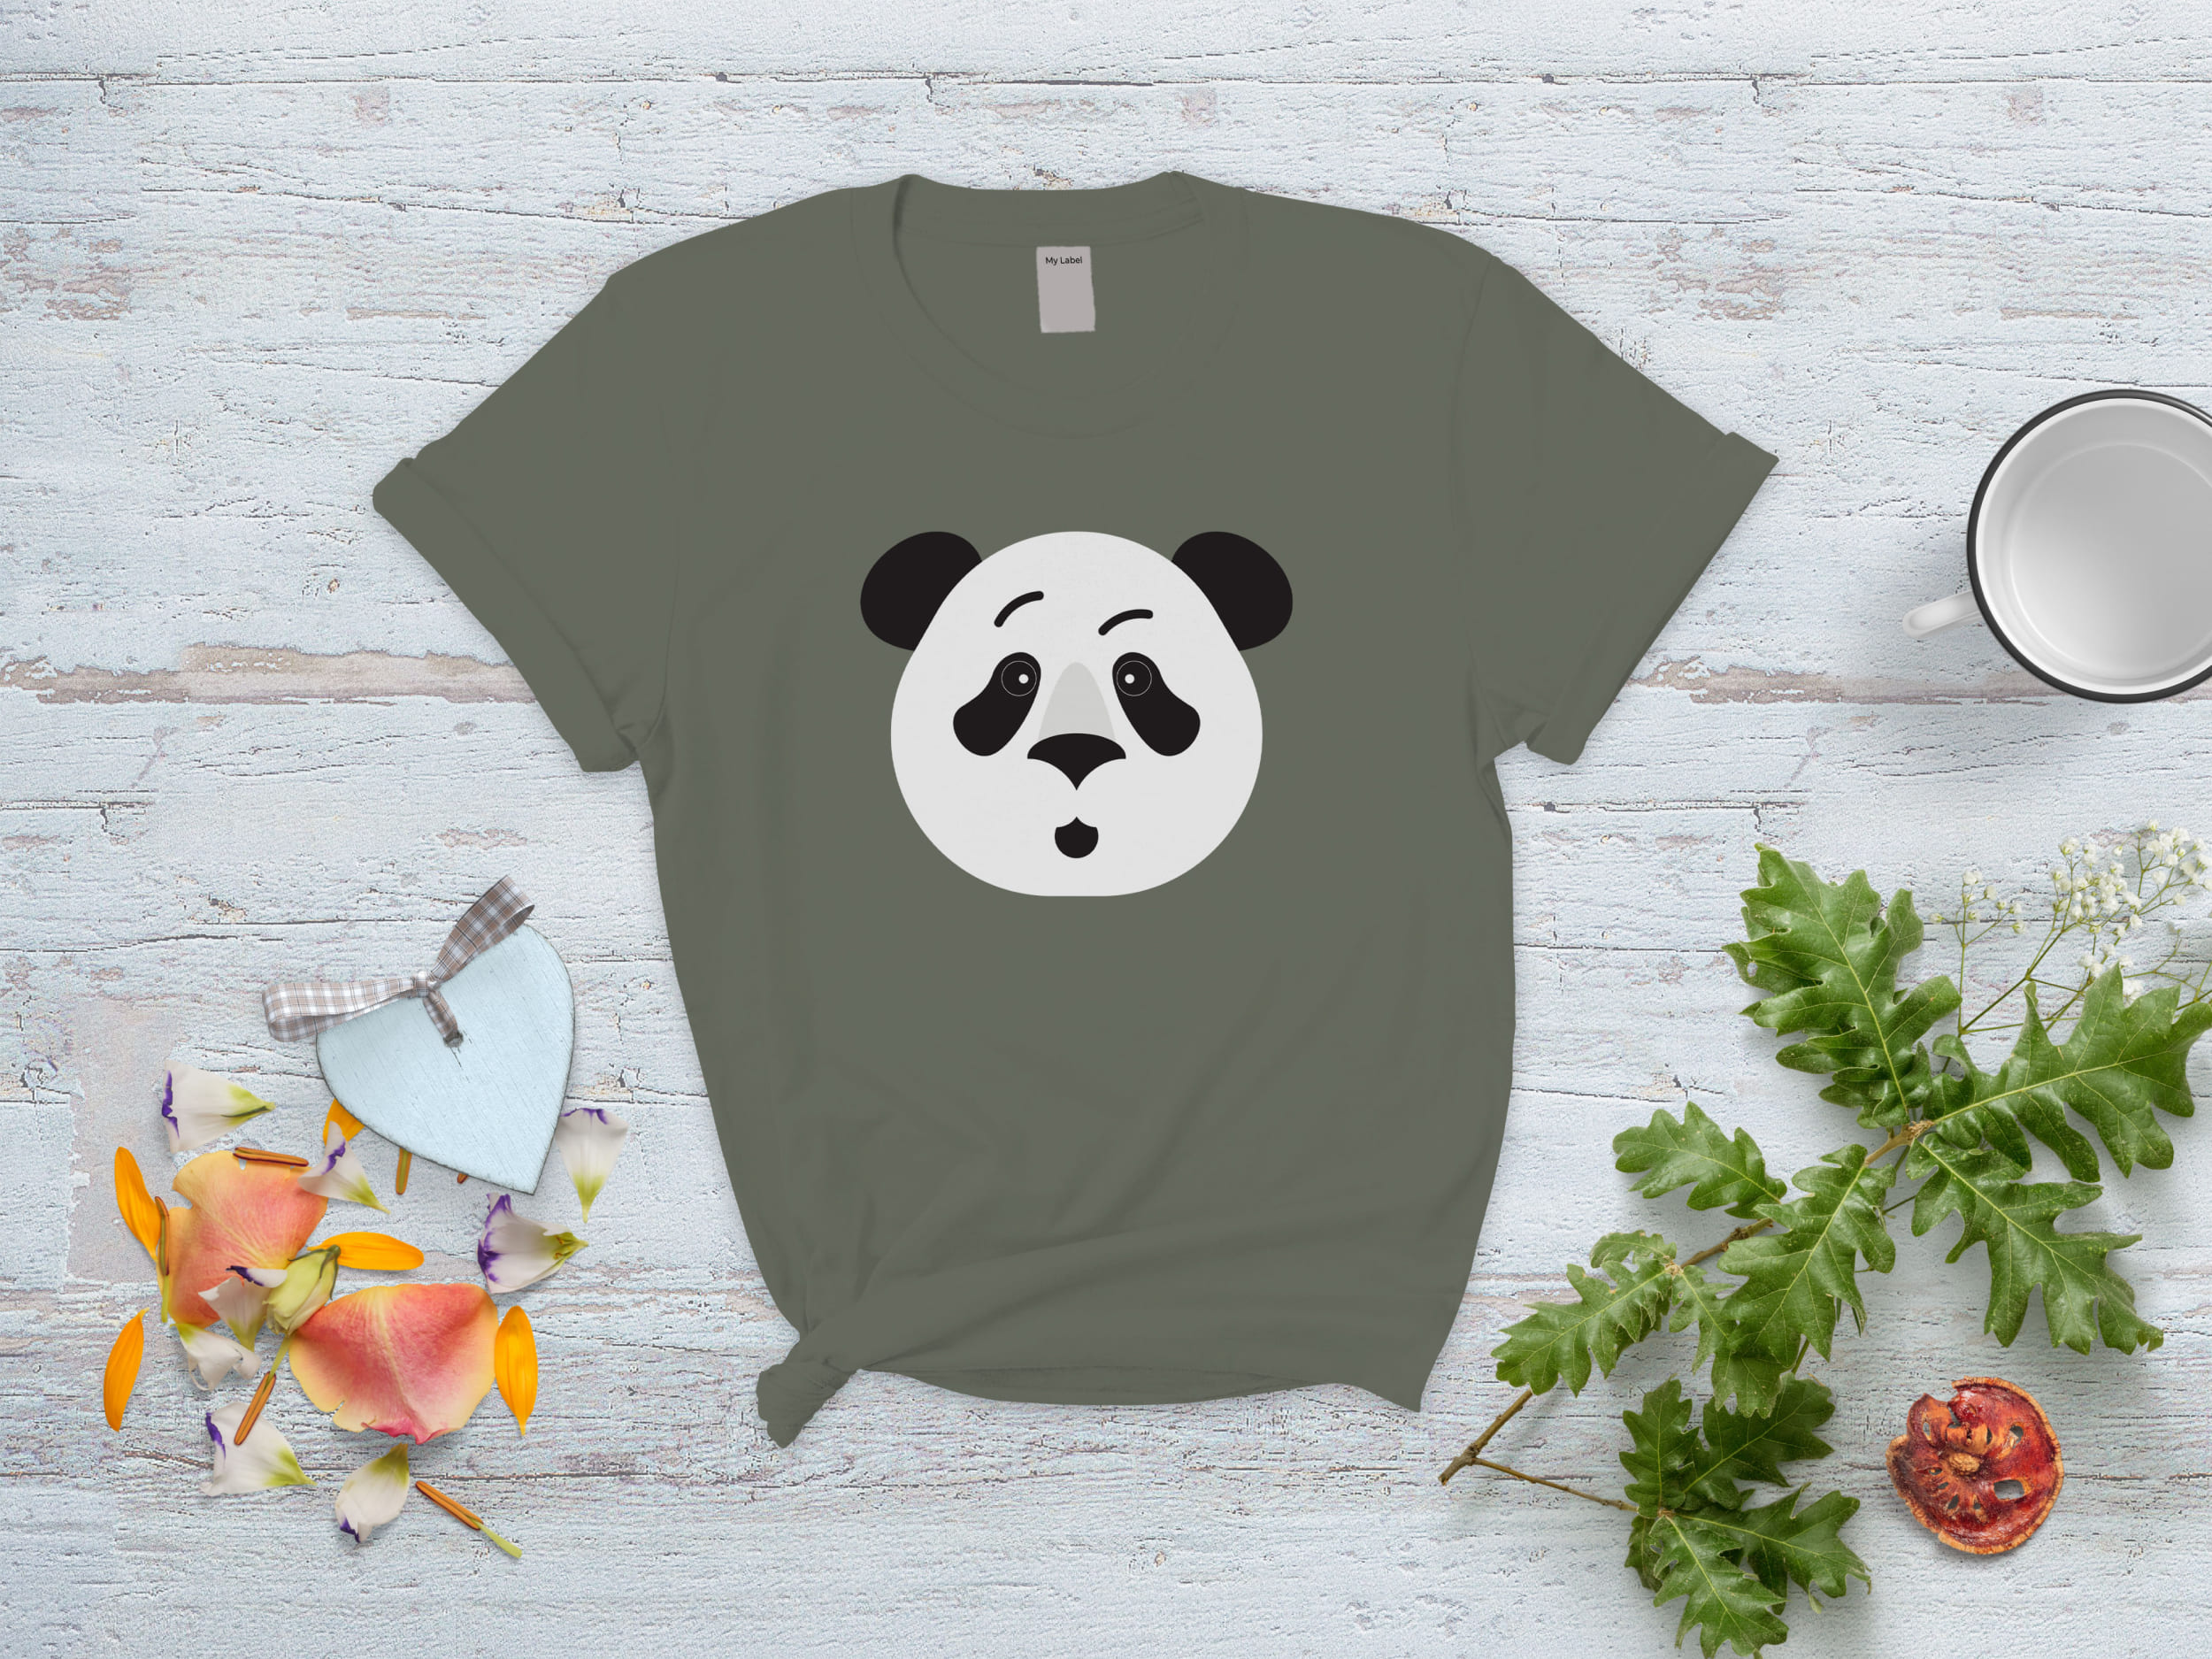 Gray t-shirt with a panda surprised face on a gray and white background with various objects.